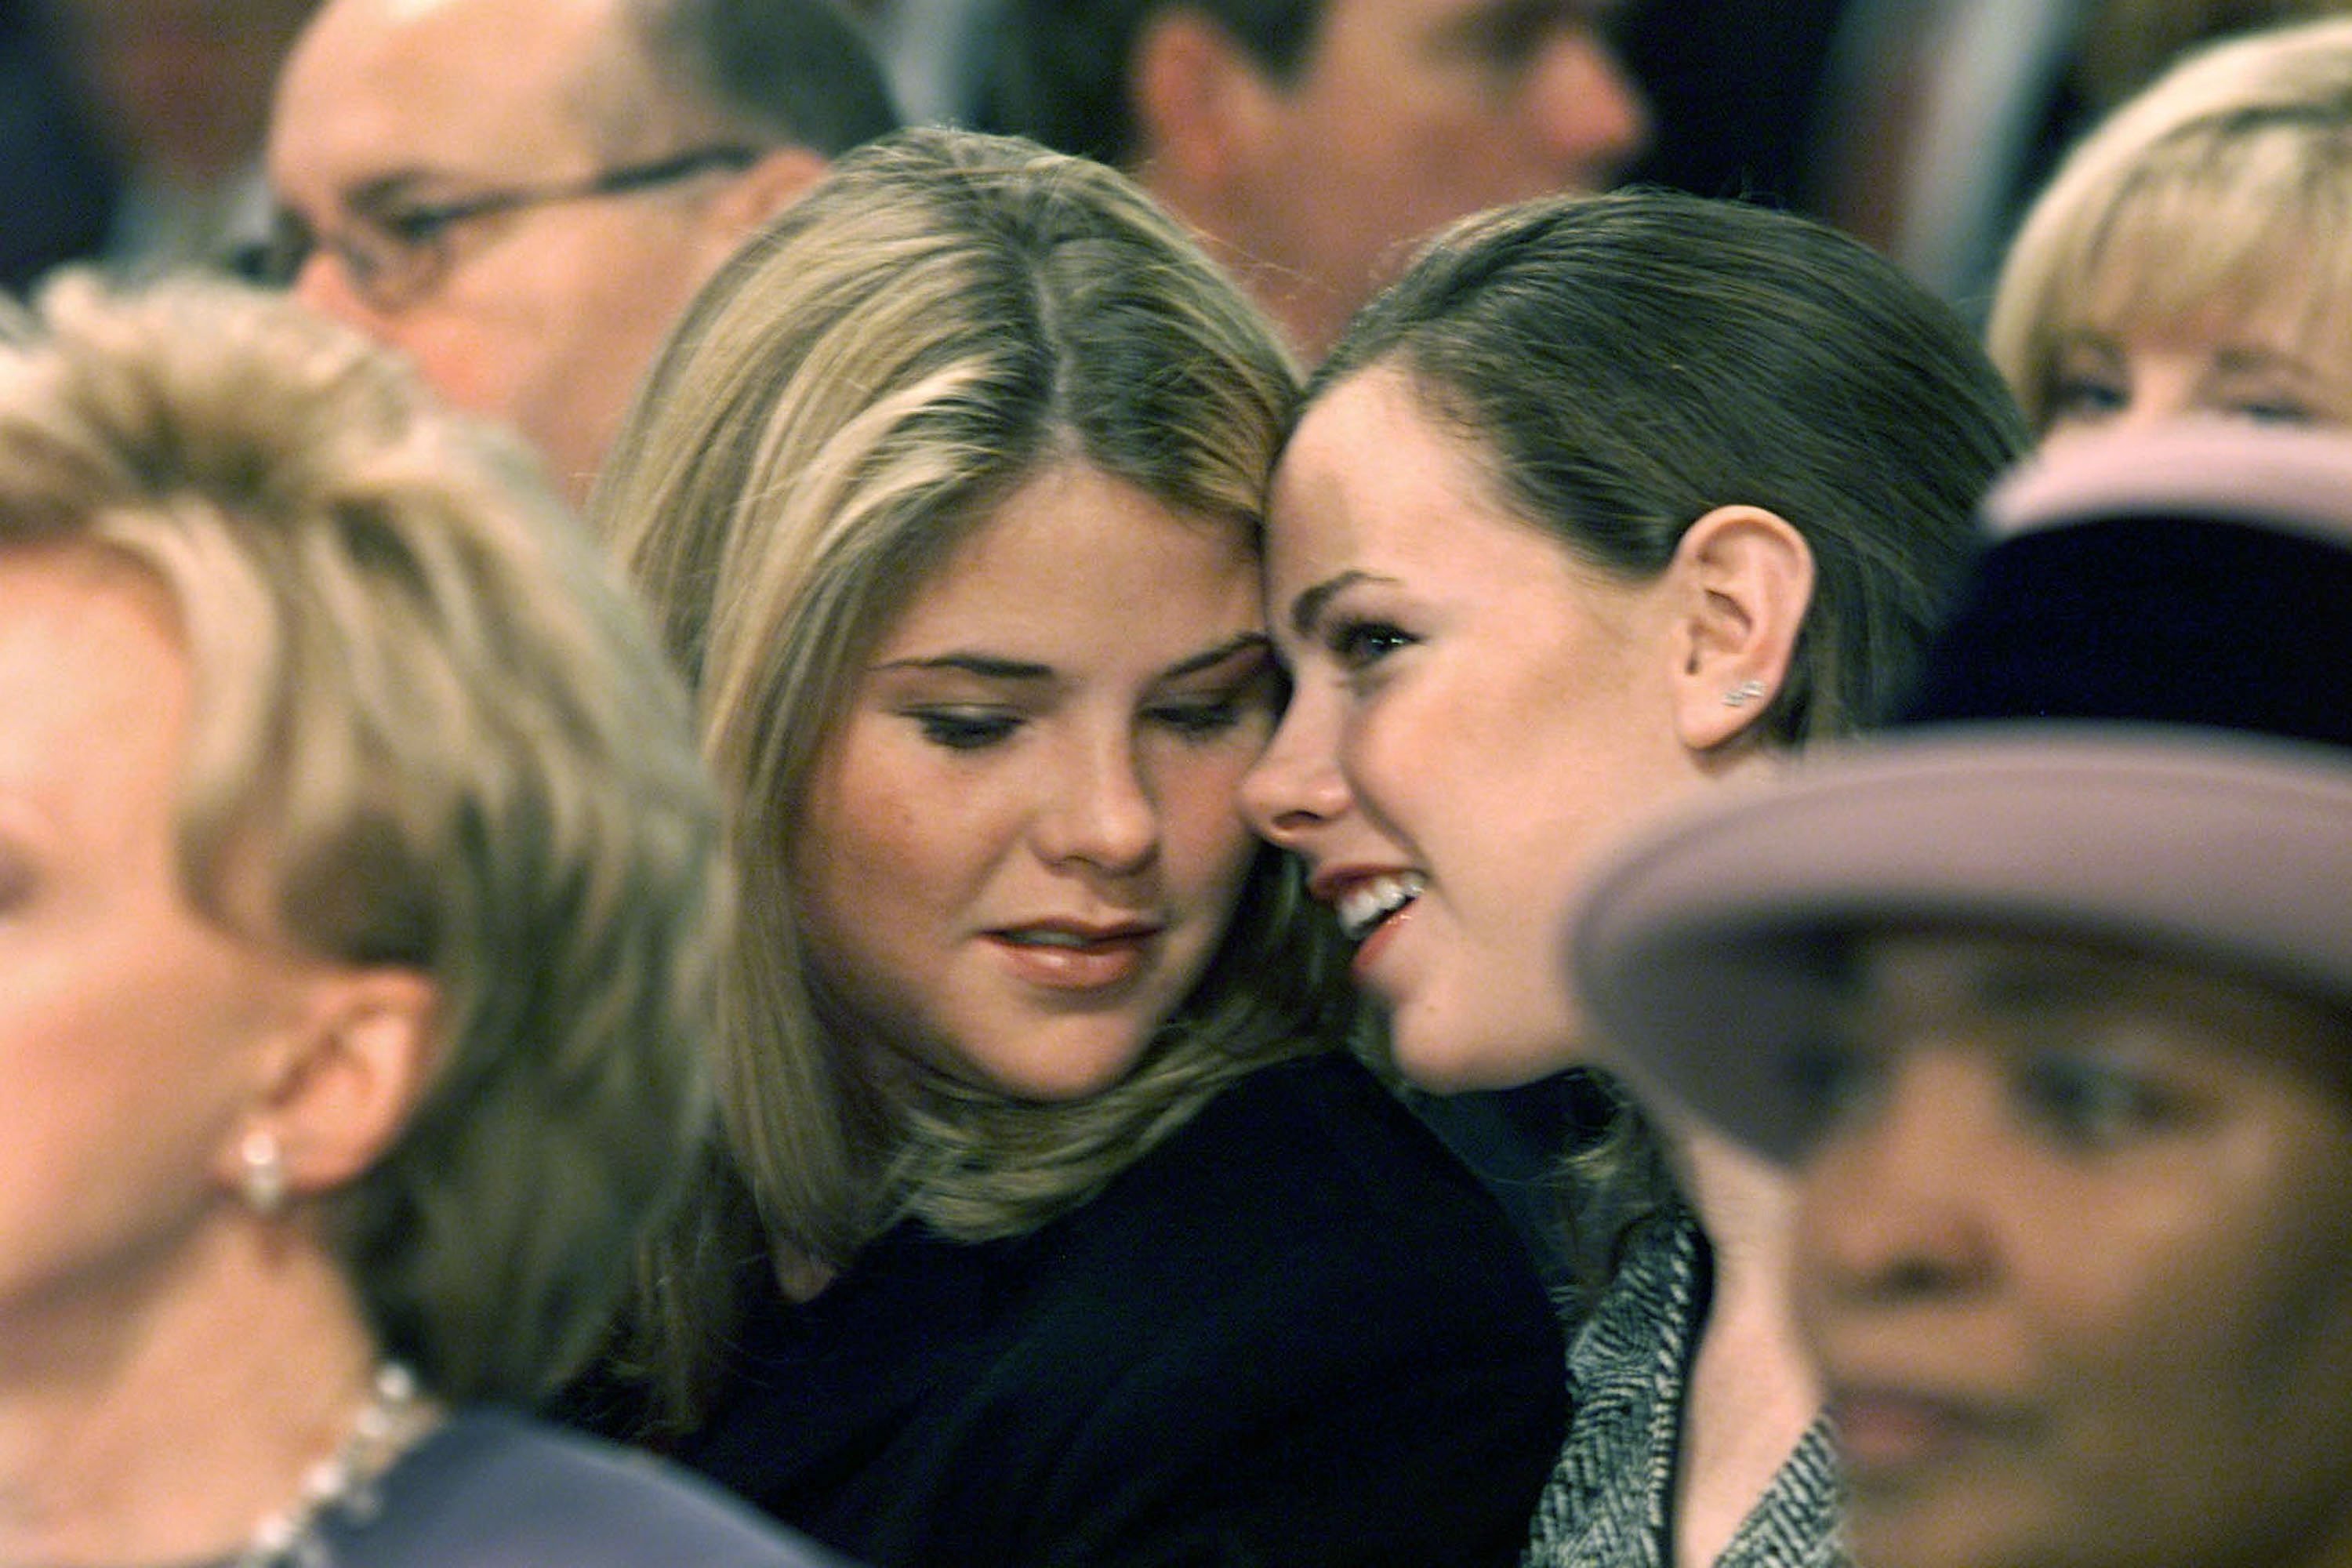 George W. Bush's twin daughters Jenna and Barbara  during a pre-inaugural event January 19, 2001 in Washington, DC | Source: Getty Images